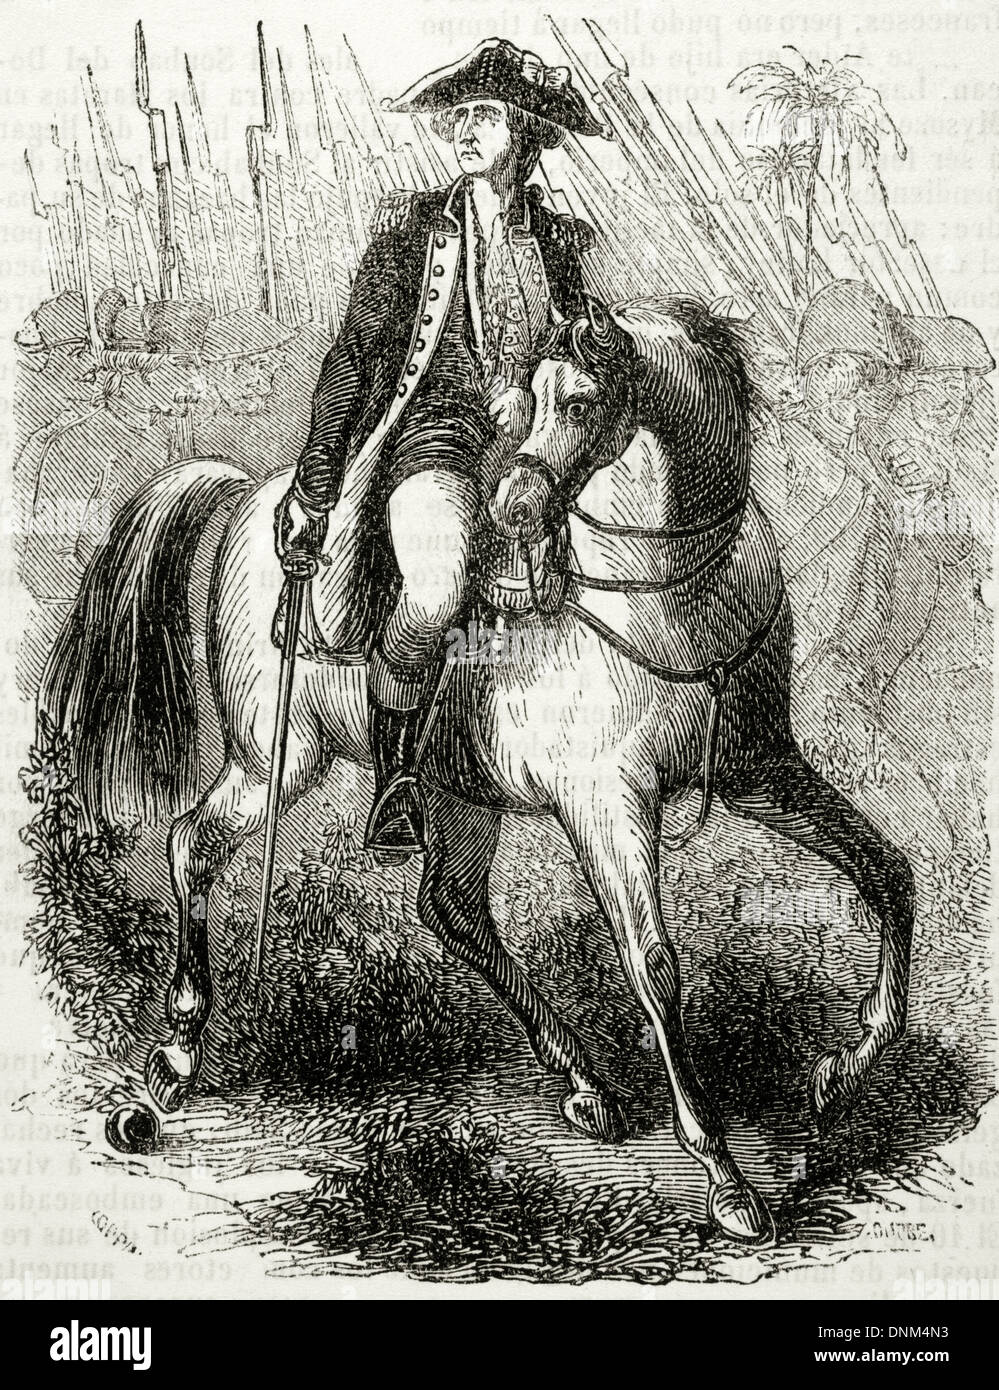 Marquis of La Fayette (1757-1834). French military and politician. Engraving by E. Coppin. Universal Library, 1851. Stock Photo